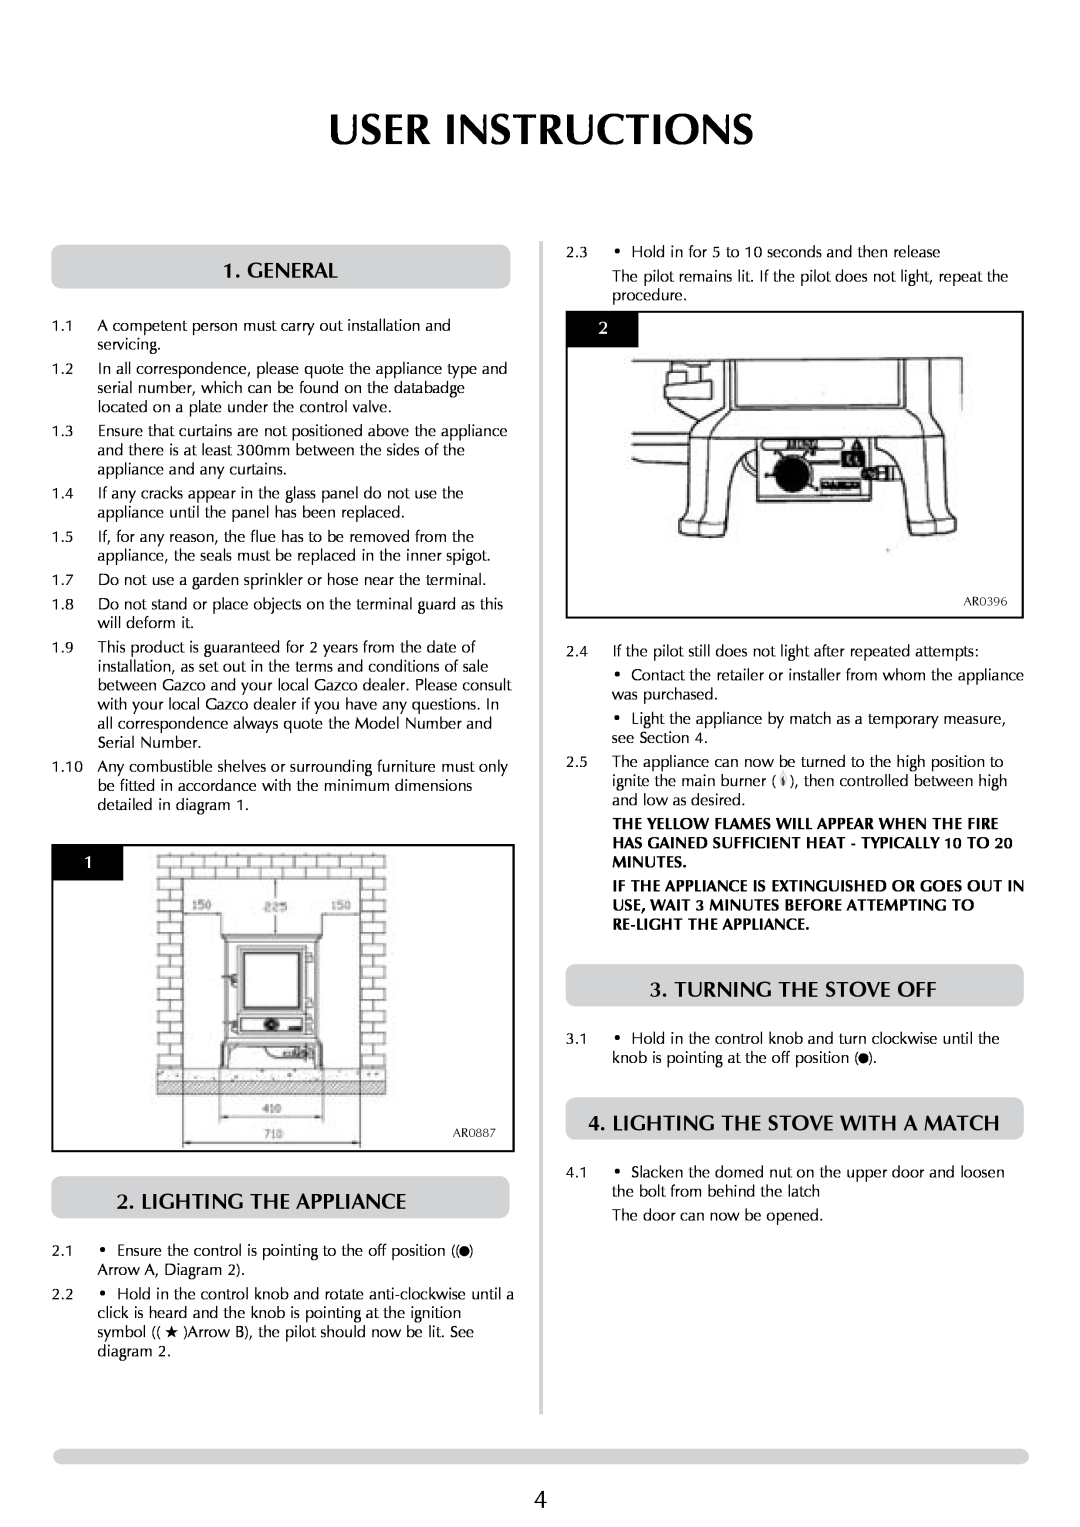 Stovax P8050 User Instructions, general, lighting the appliance, turning the stove off, Lighting The Stove With A Match 